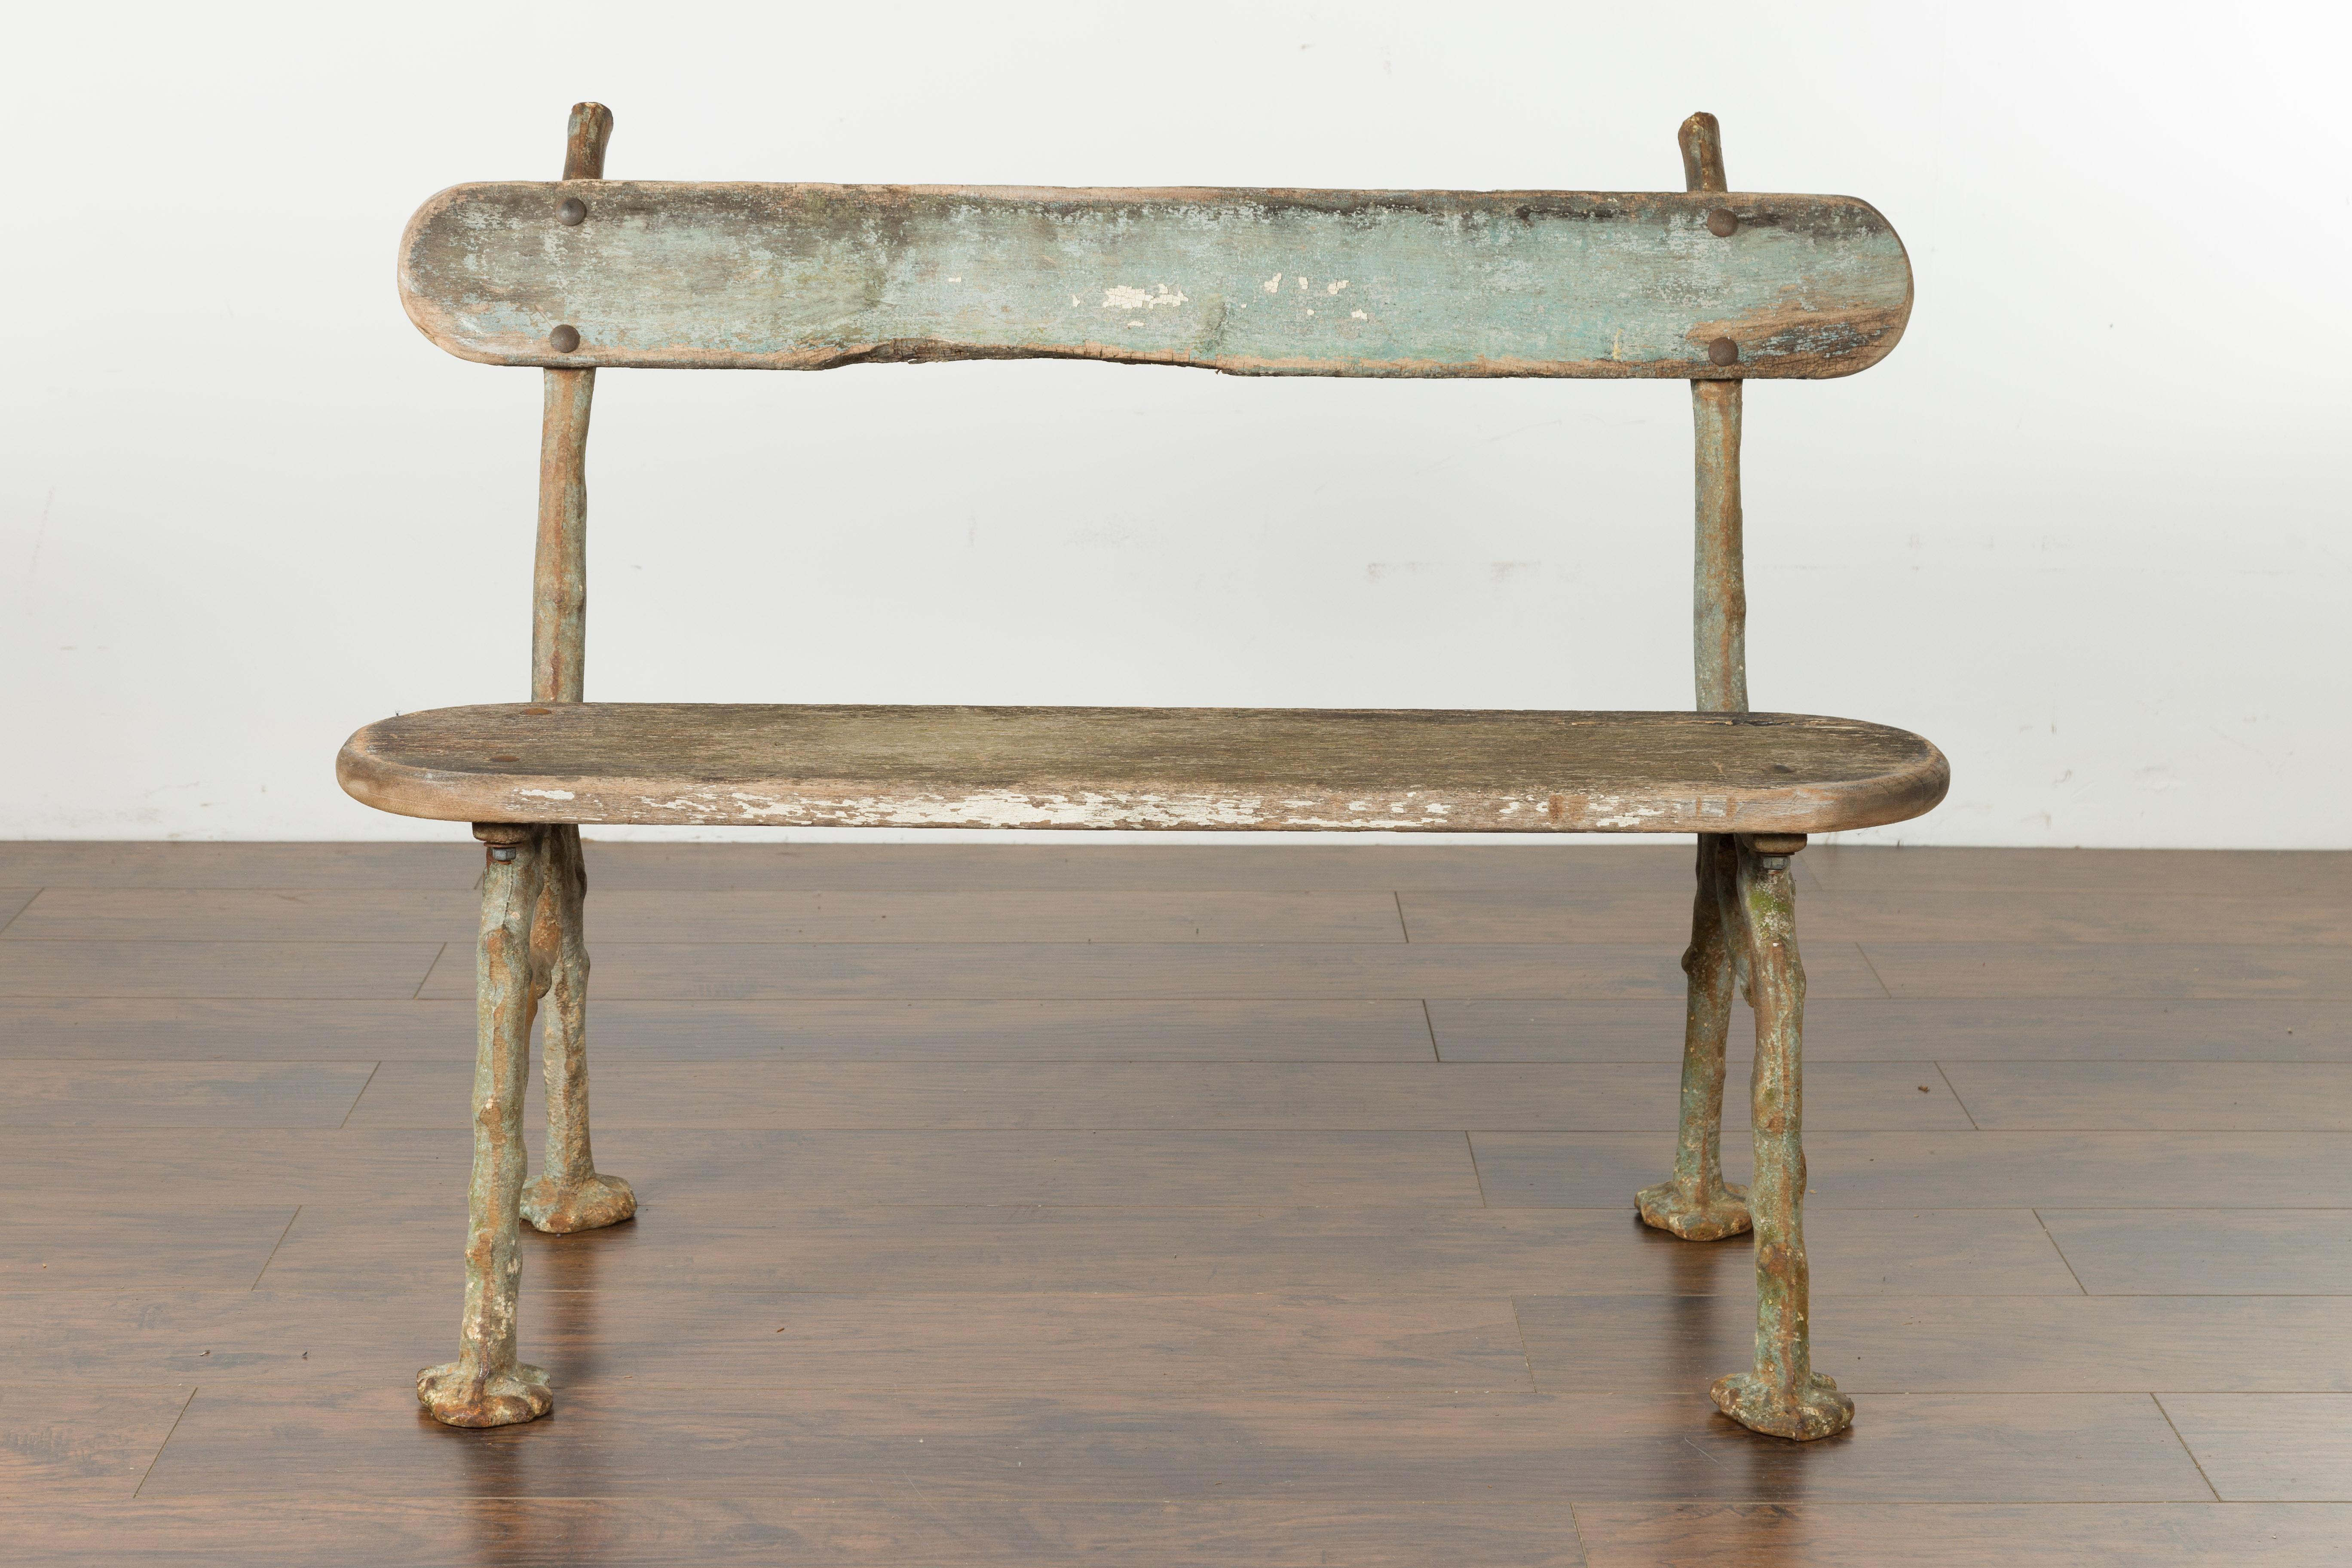 A French rustic faux-bois iron garden bench from the late 19th century. Particularly popular in France during the later years of the 19th century through the 1940s, the faux bois technique (translating as false wood) allowed artists to use various